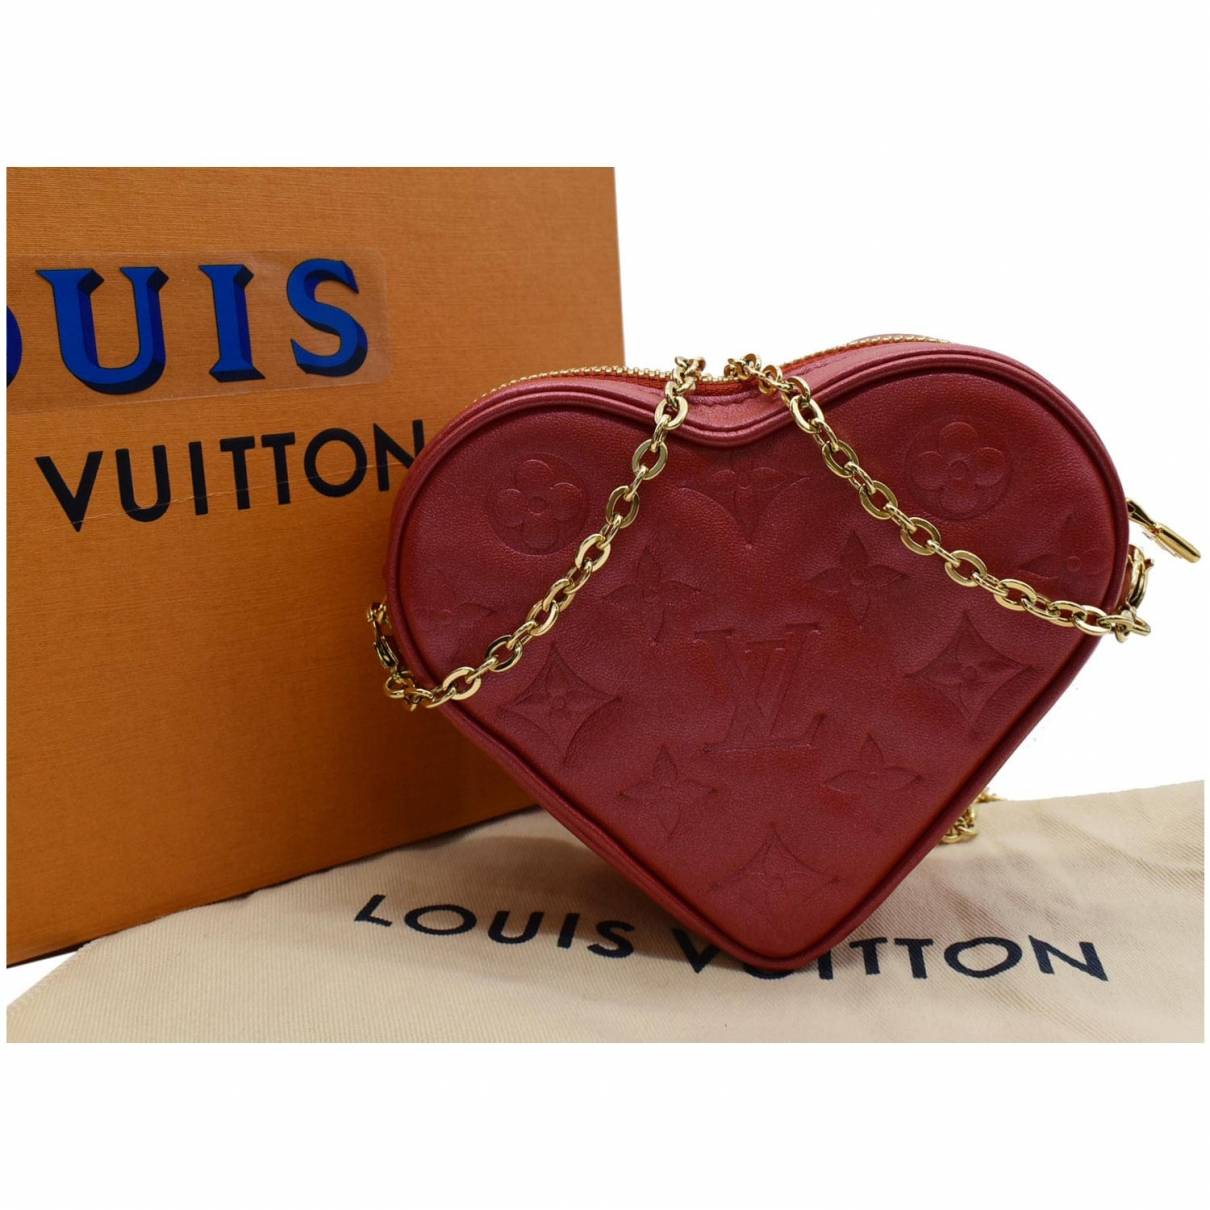 Louis Vuitton - Authenticated Chain Bag Handbag - Leather Red For Woman, Very Good condition